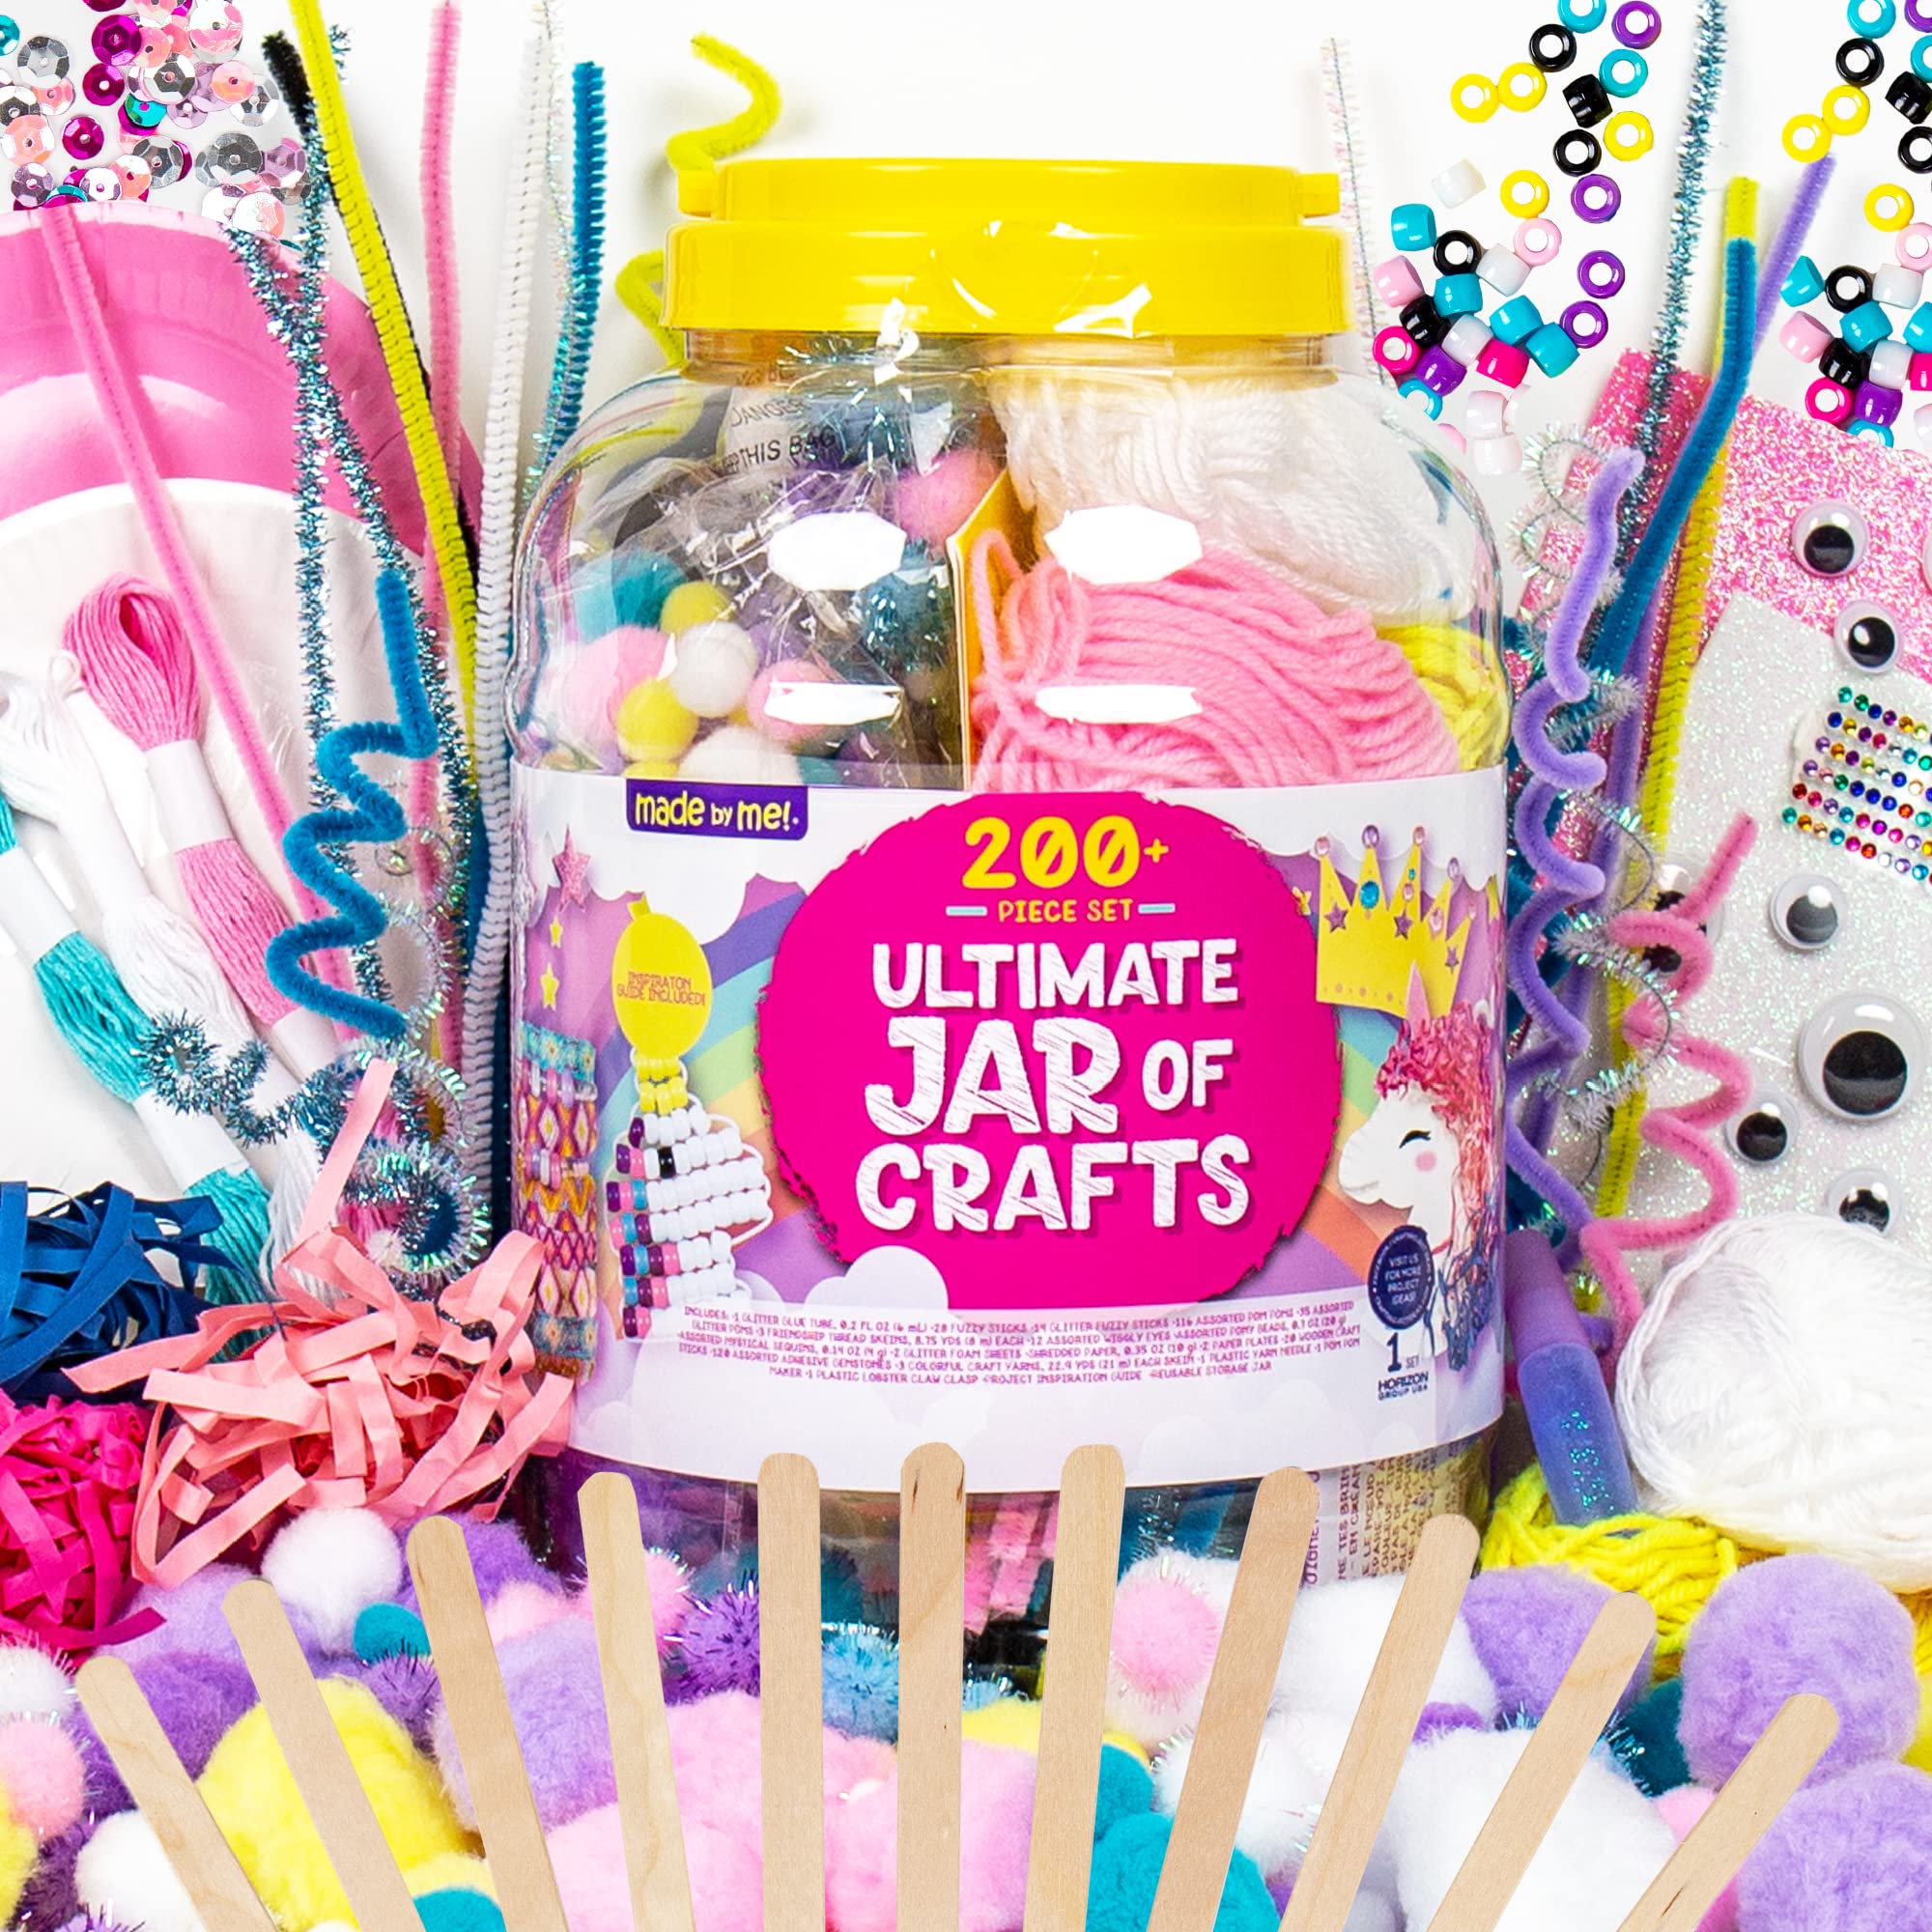 Made By Me! Ultimate Jar of Crafts, 200+ Piece Mystical Craft Supply Bundle, Craft Supplies Starter Kit, Great Arts & Crafts Kit for Travel and On-The-Go, Perfect for Kids and Adults Ages 6+